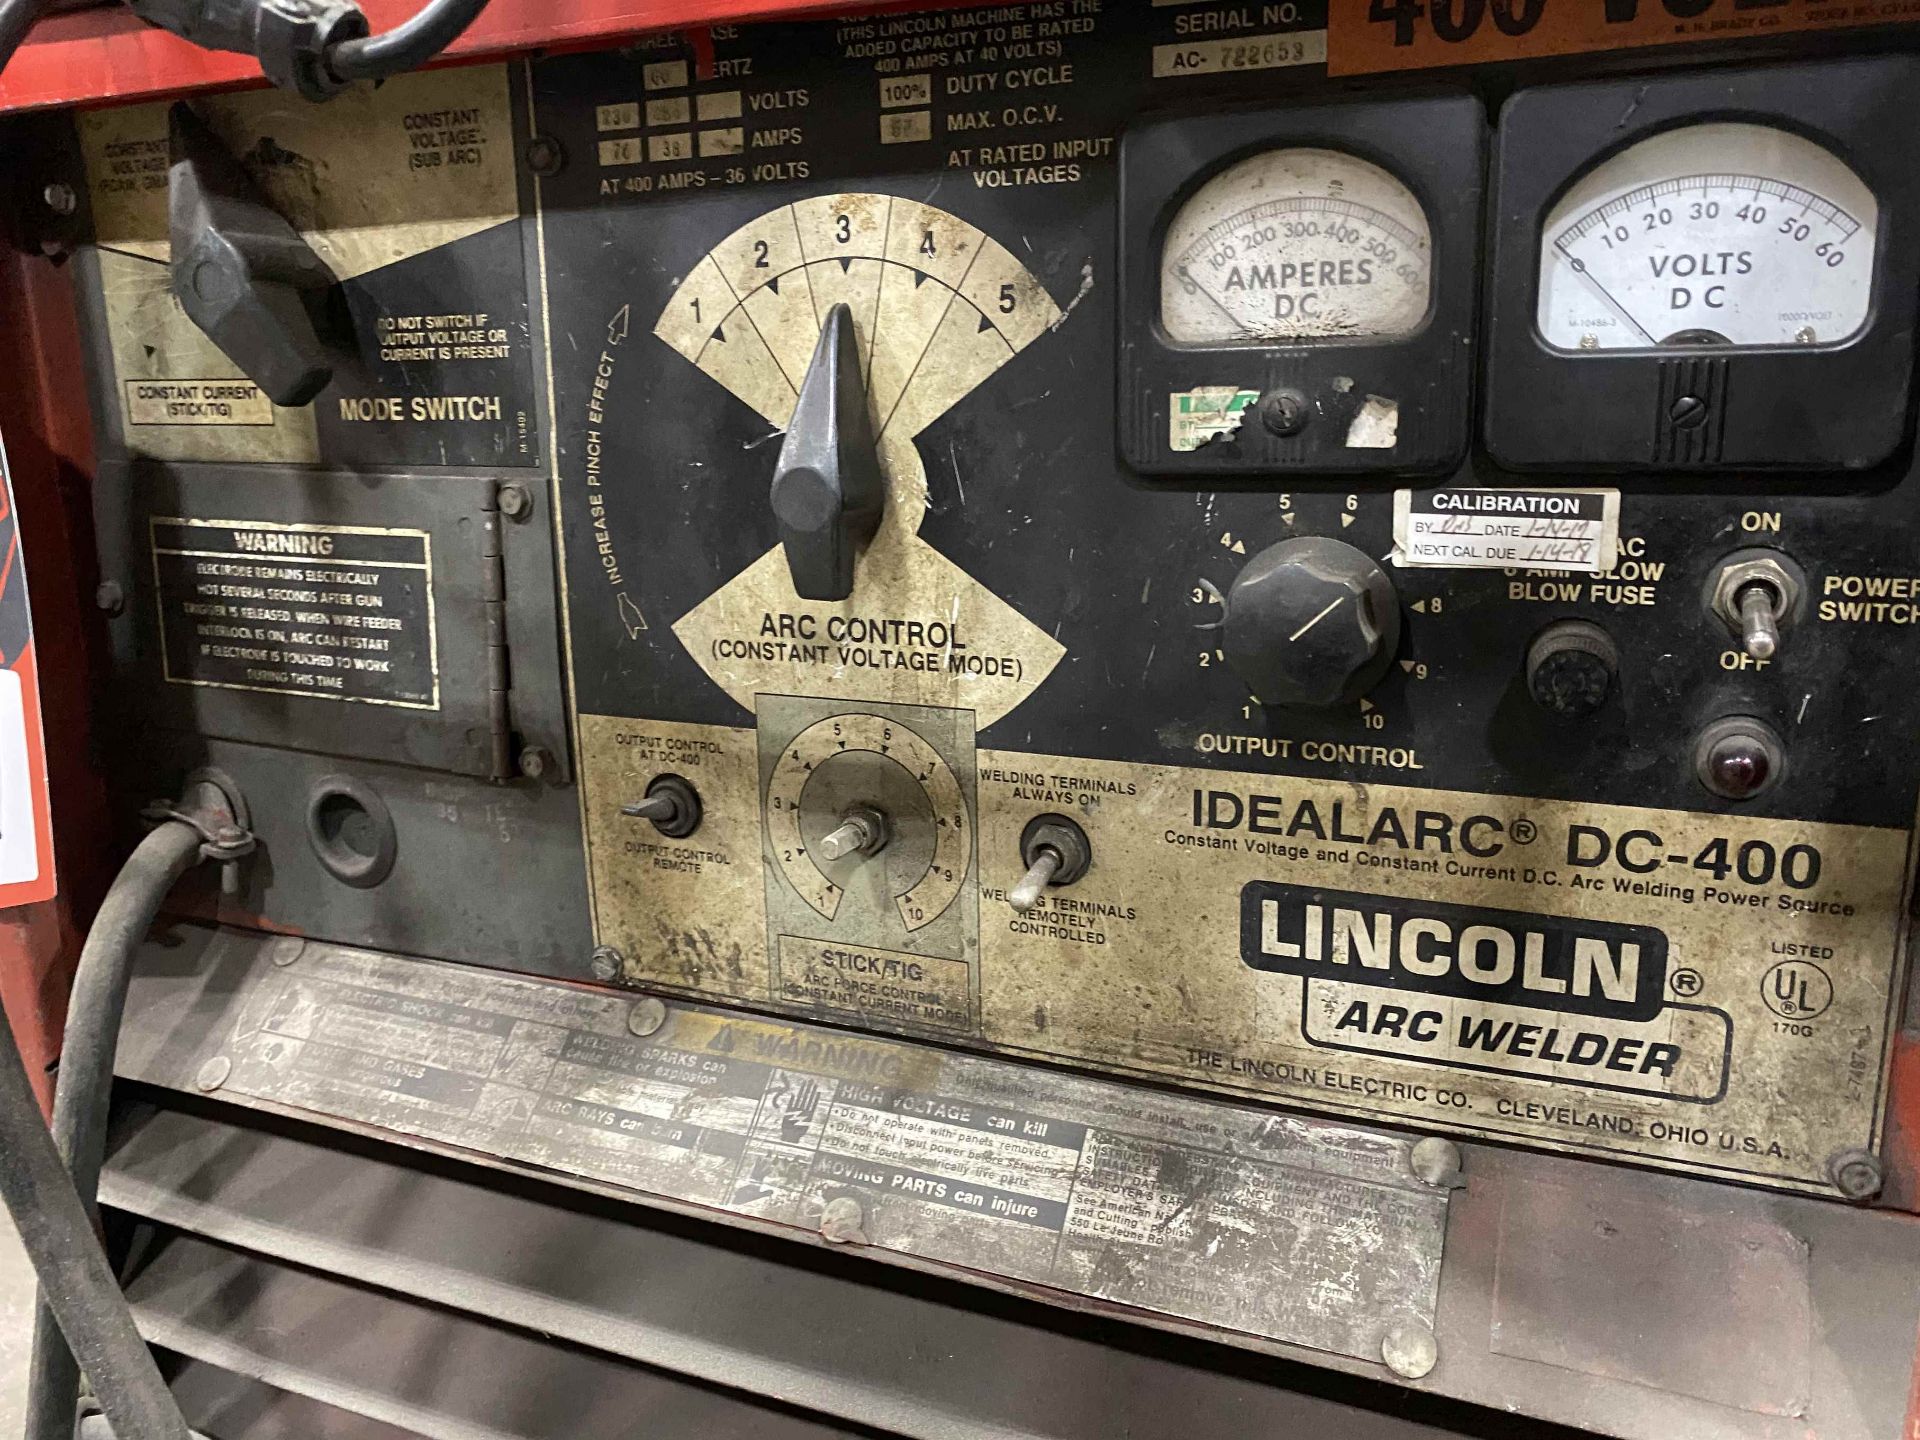 LINCOLN IDEALARC DC-400 Arc Welder, s/n AC-722653, w/ LINCOLN LN-7 Wire Feed - Image 3 of 5